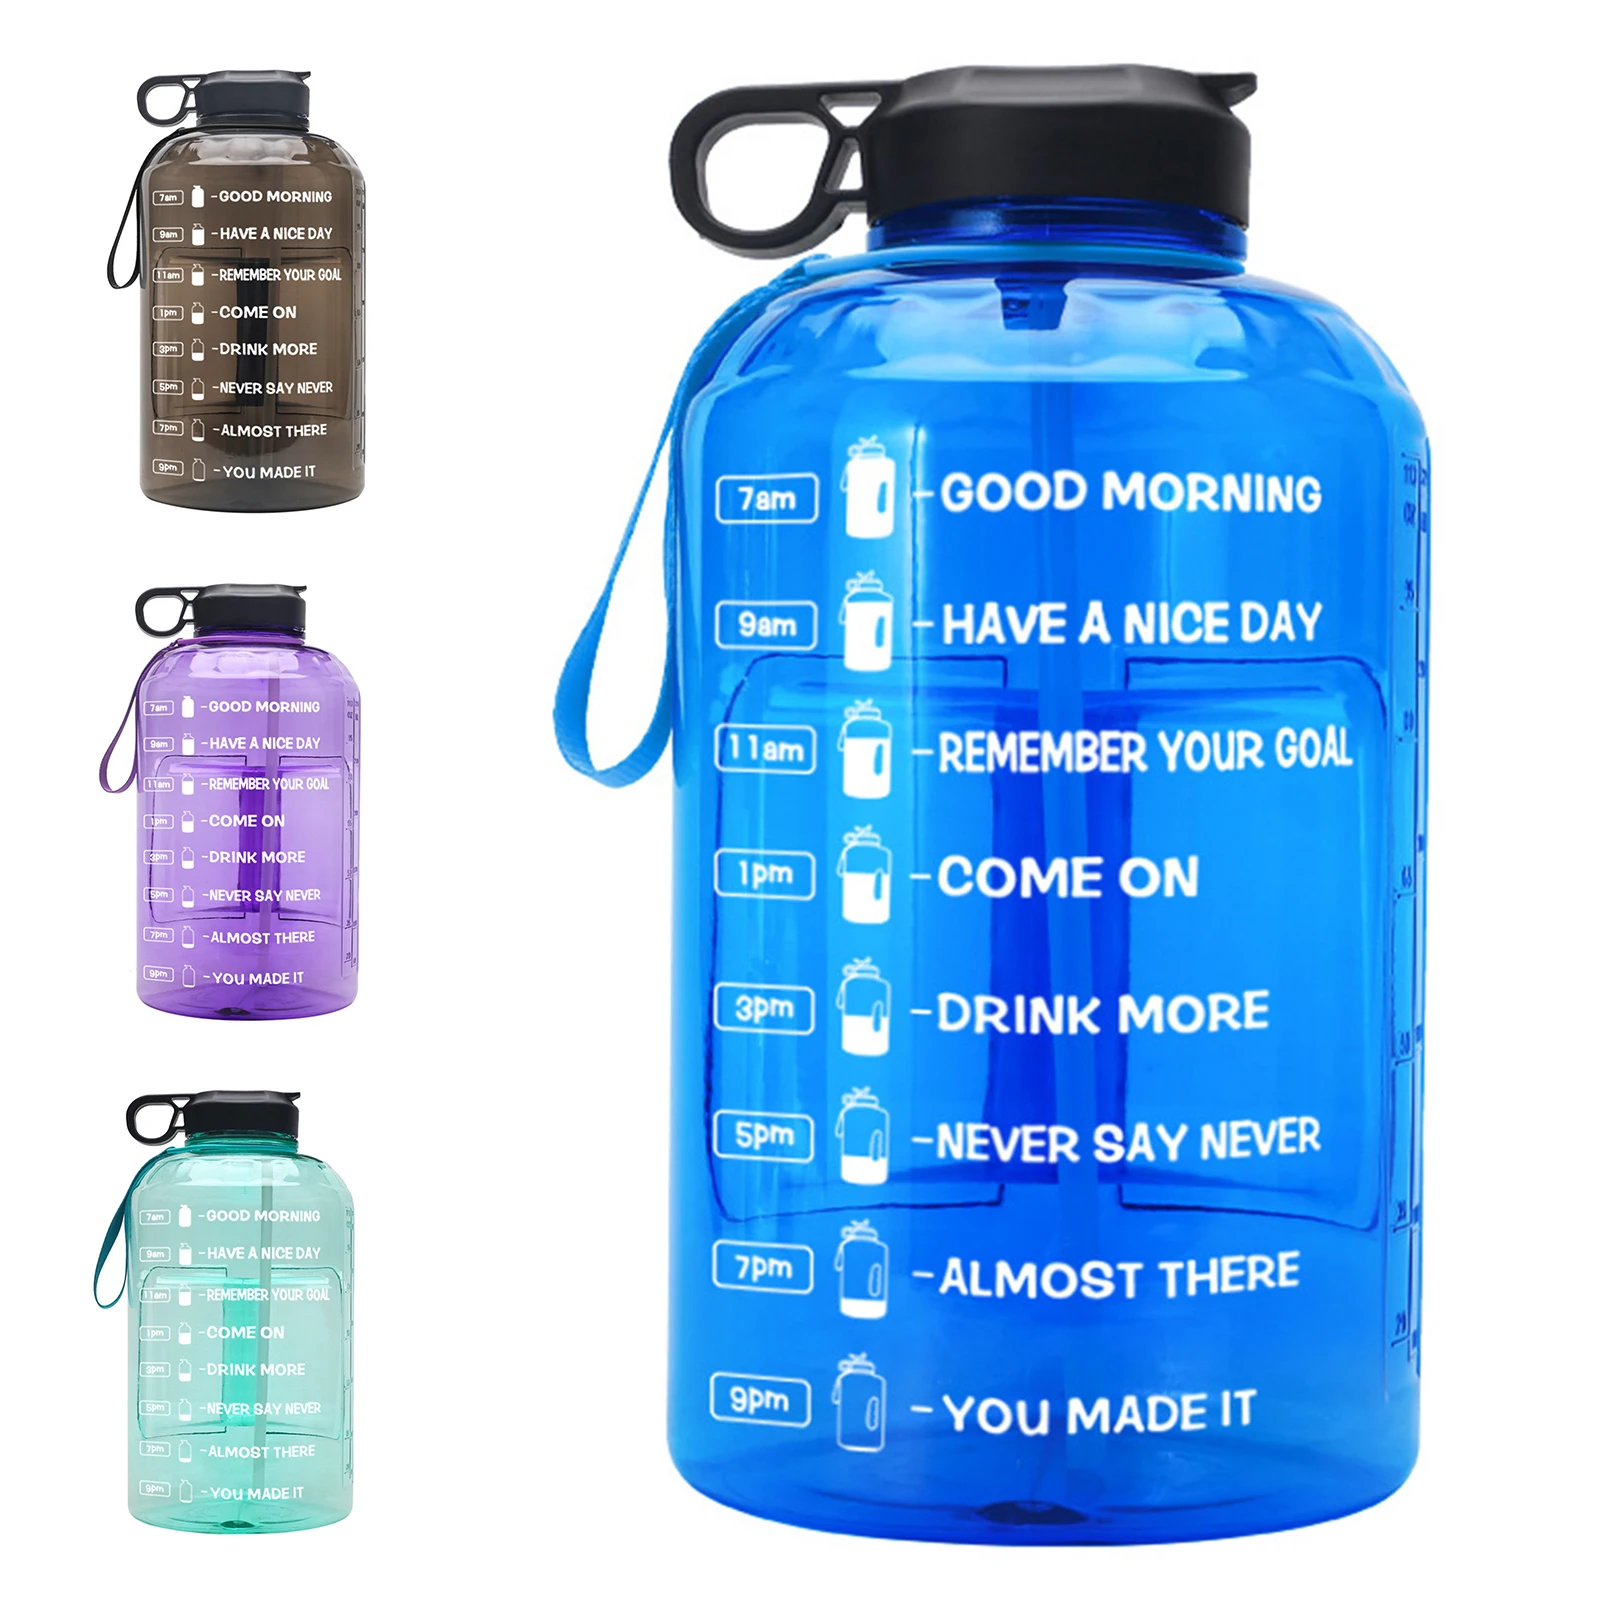 Leakproof Straw Lid BPA Free Water Jug with Motivational Time Marker & Phone Holder Handle to Remind You Drink Enough Water Throughout The Day for Goals BuildLife 1 Gallon Water Bottle 